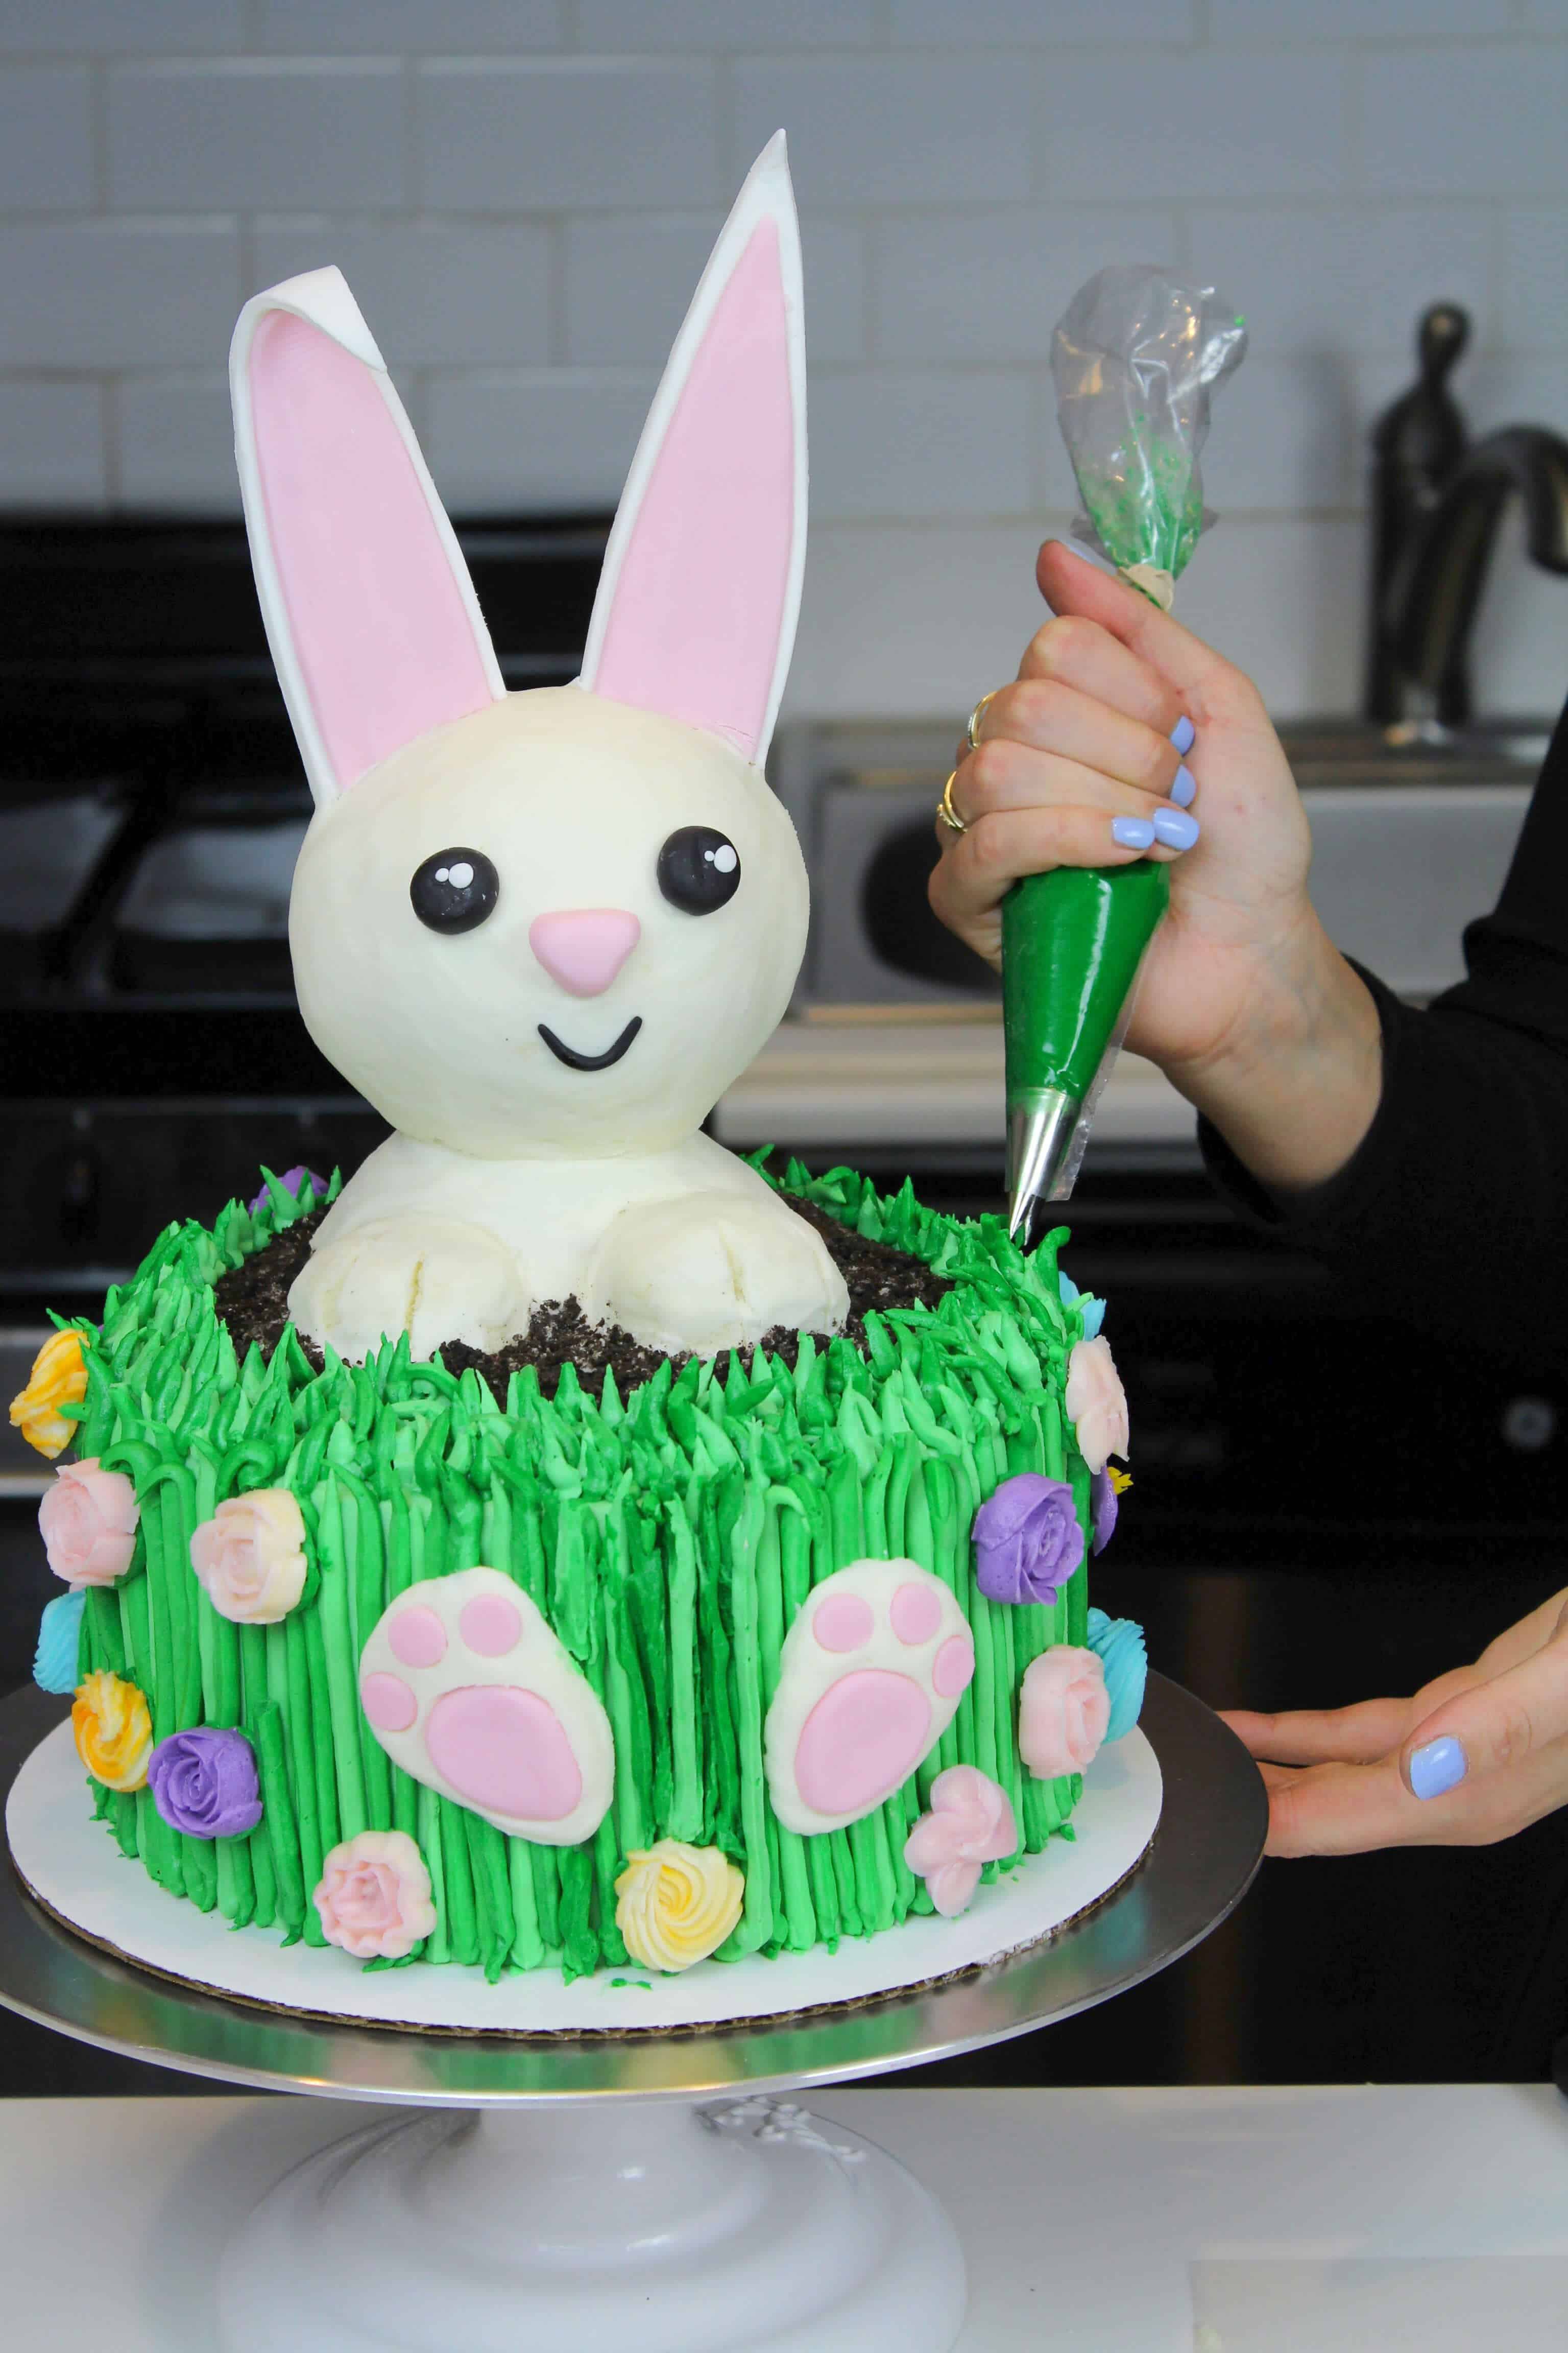 Easy Coconut Easter Bunny Cake (Fun for Kids to Make)